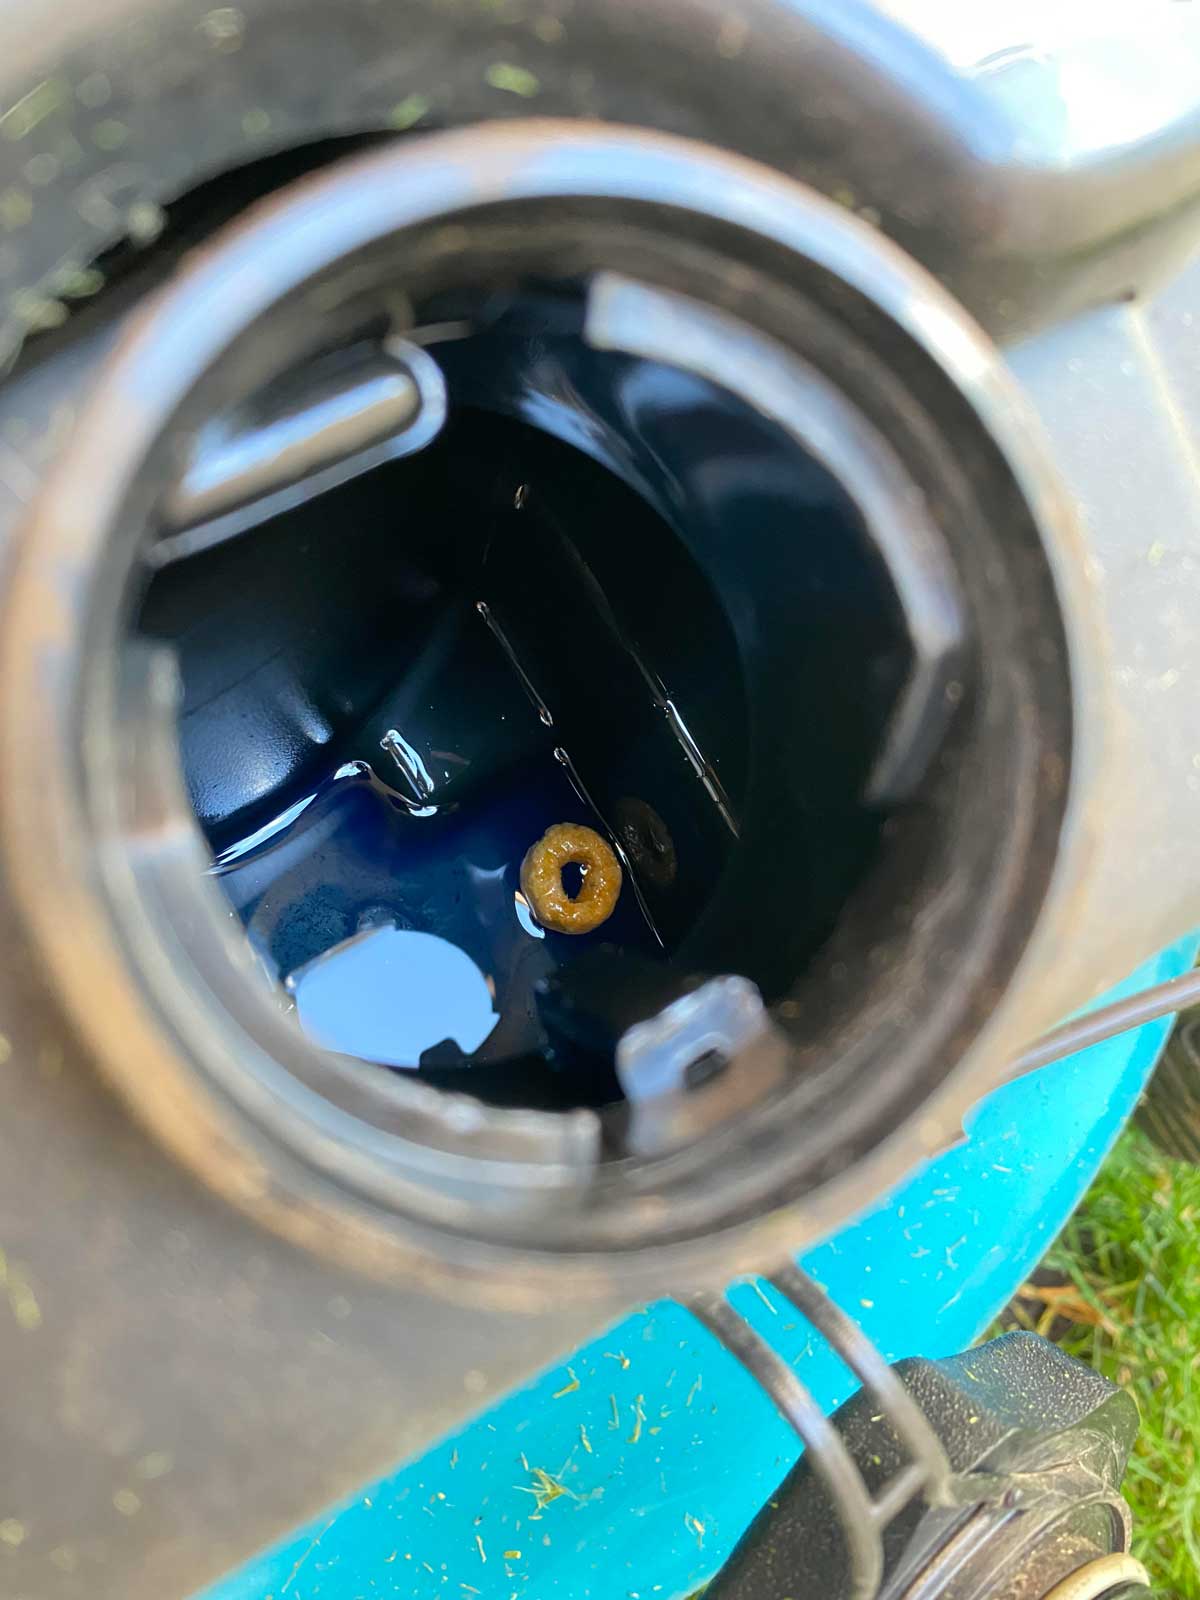 Went to fill up the gas tank and noticed my son has been "feeding" the lawn mower